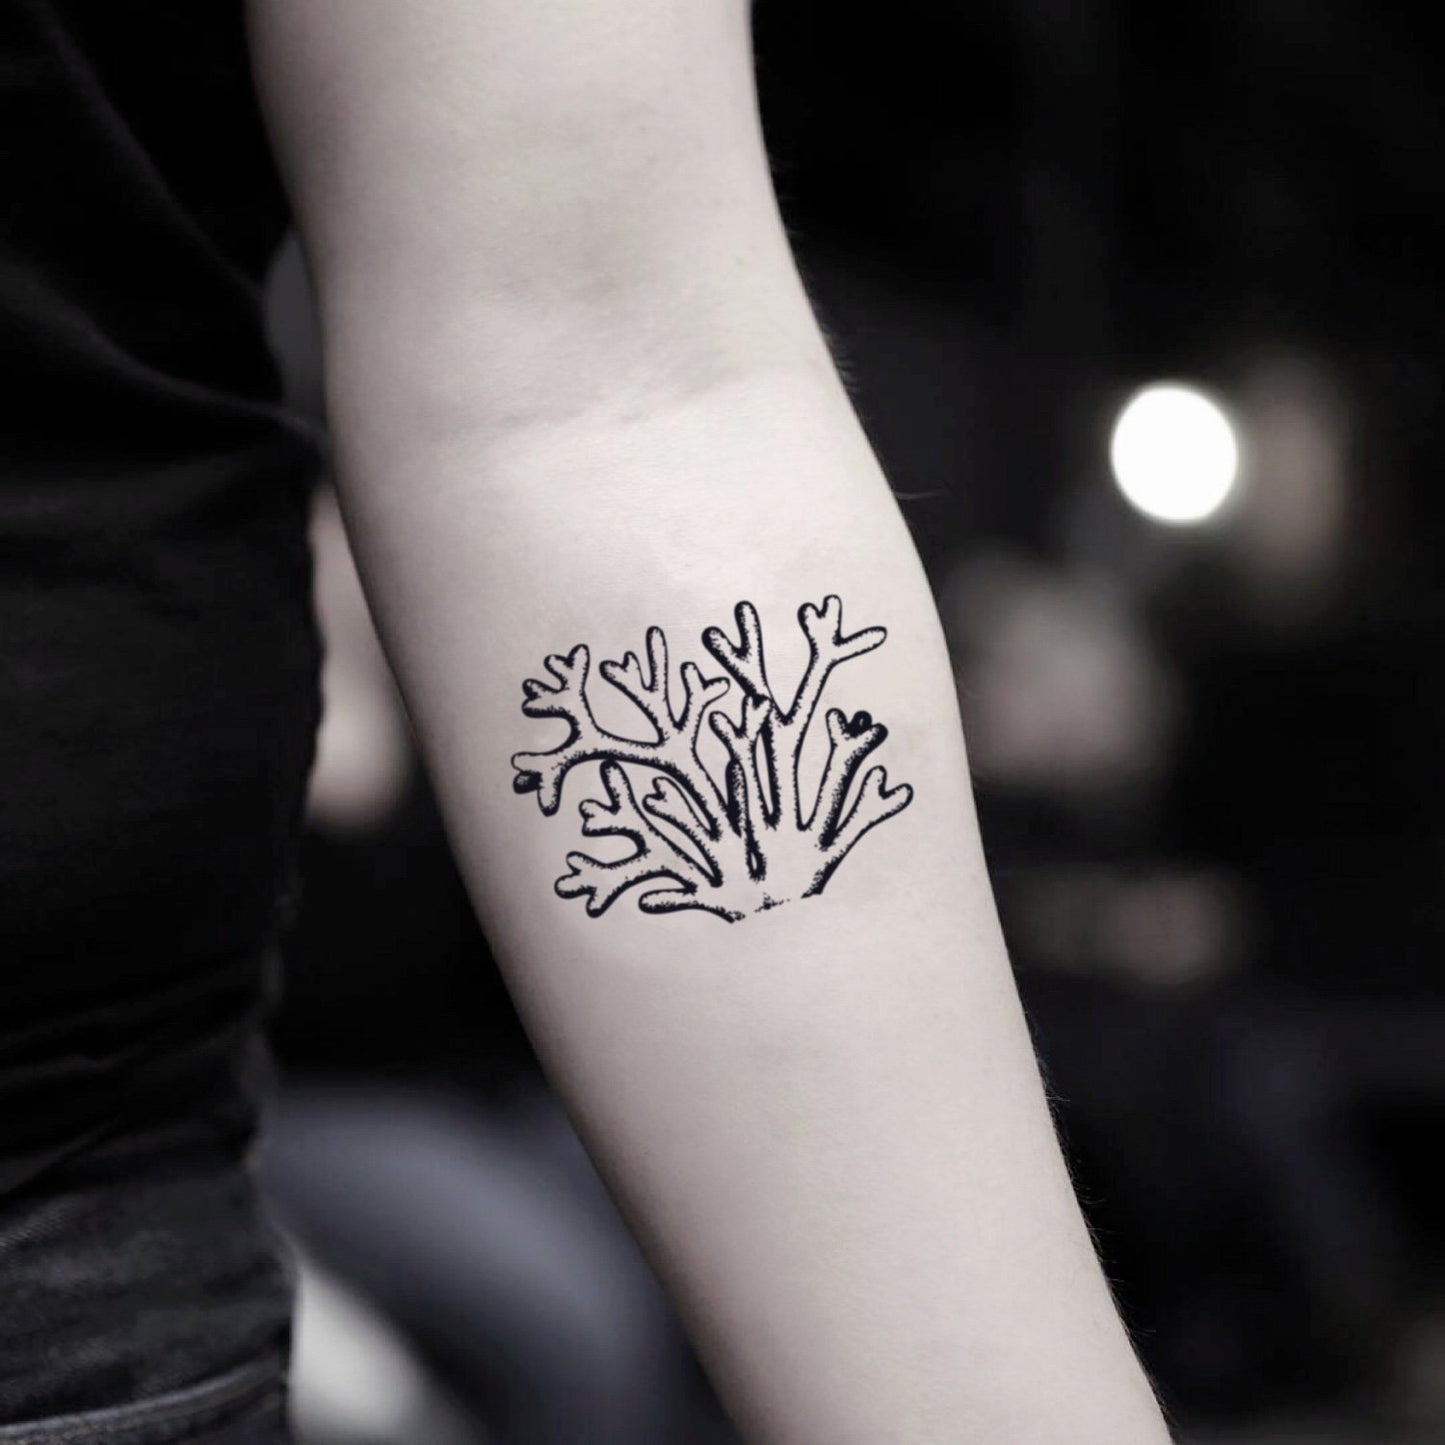 fake small coral seaweed nature temporary tattoo sticker design idea on inner arm